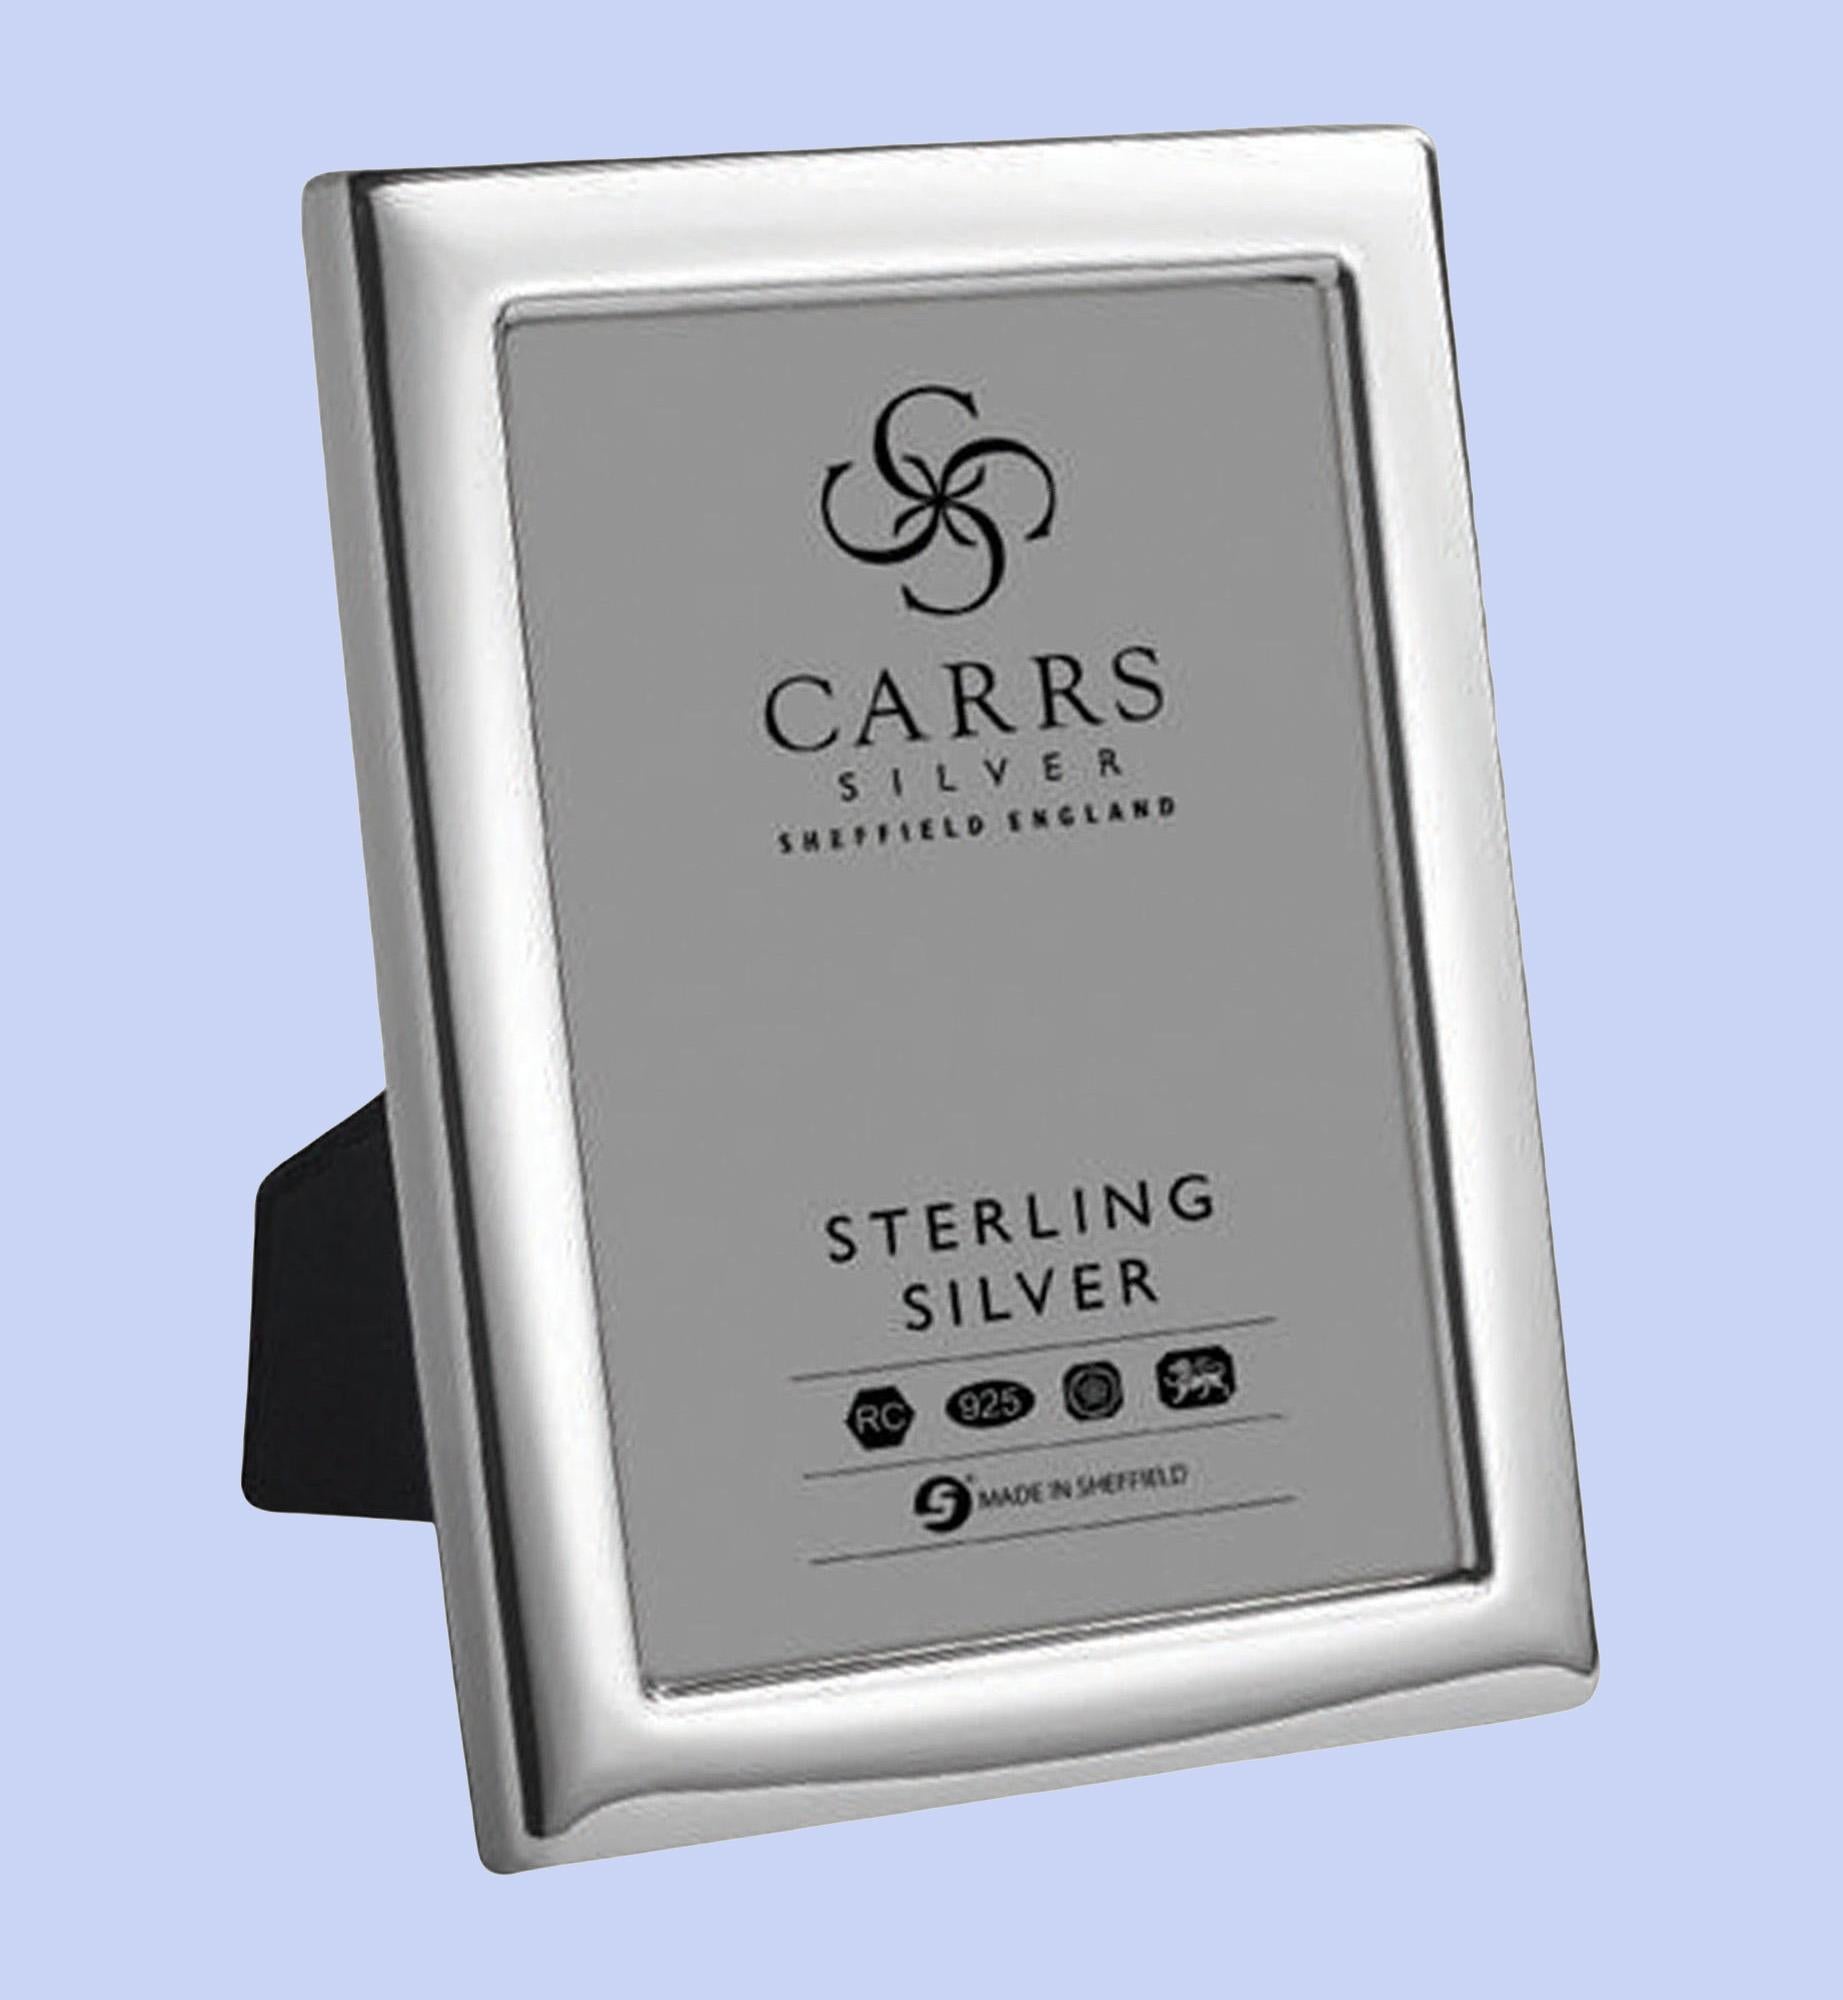 English sterling silver photograph frame is mounted on a blue velvet back. The elegant simple frame can stand both portrait and landscape. Size of photograph - 7 x 5 inches or 5 x 7 inches. Solid silver picture frames are manufactured in England